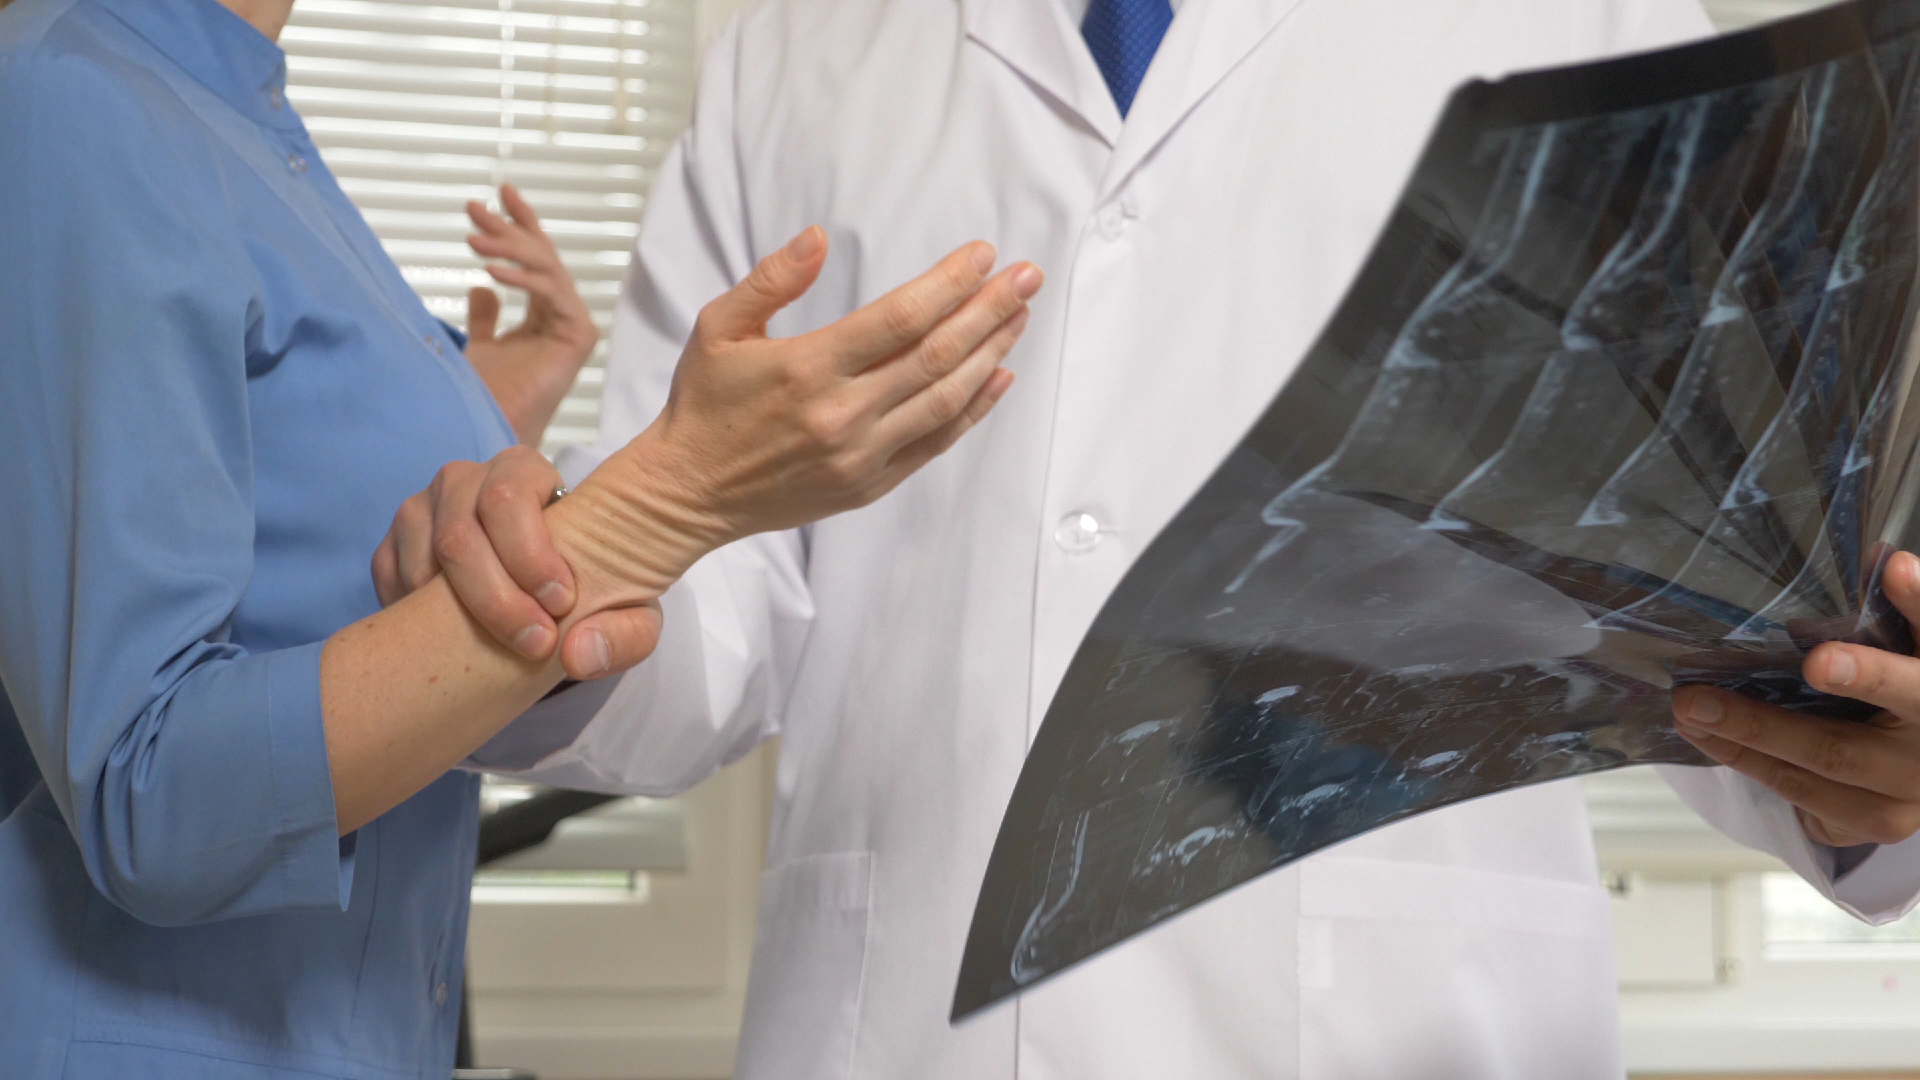 A doctor holding an x-ray while gripping their patient’s wrist